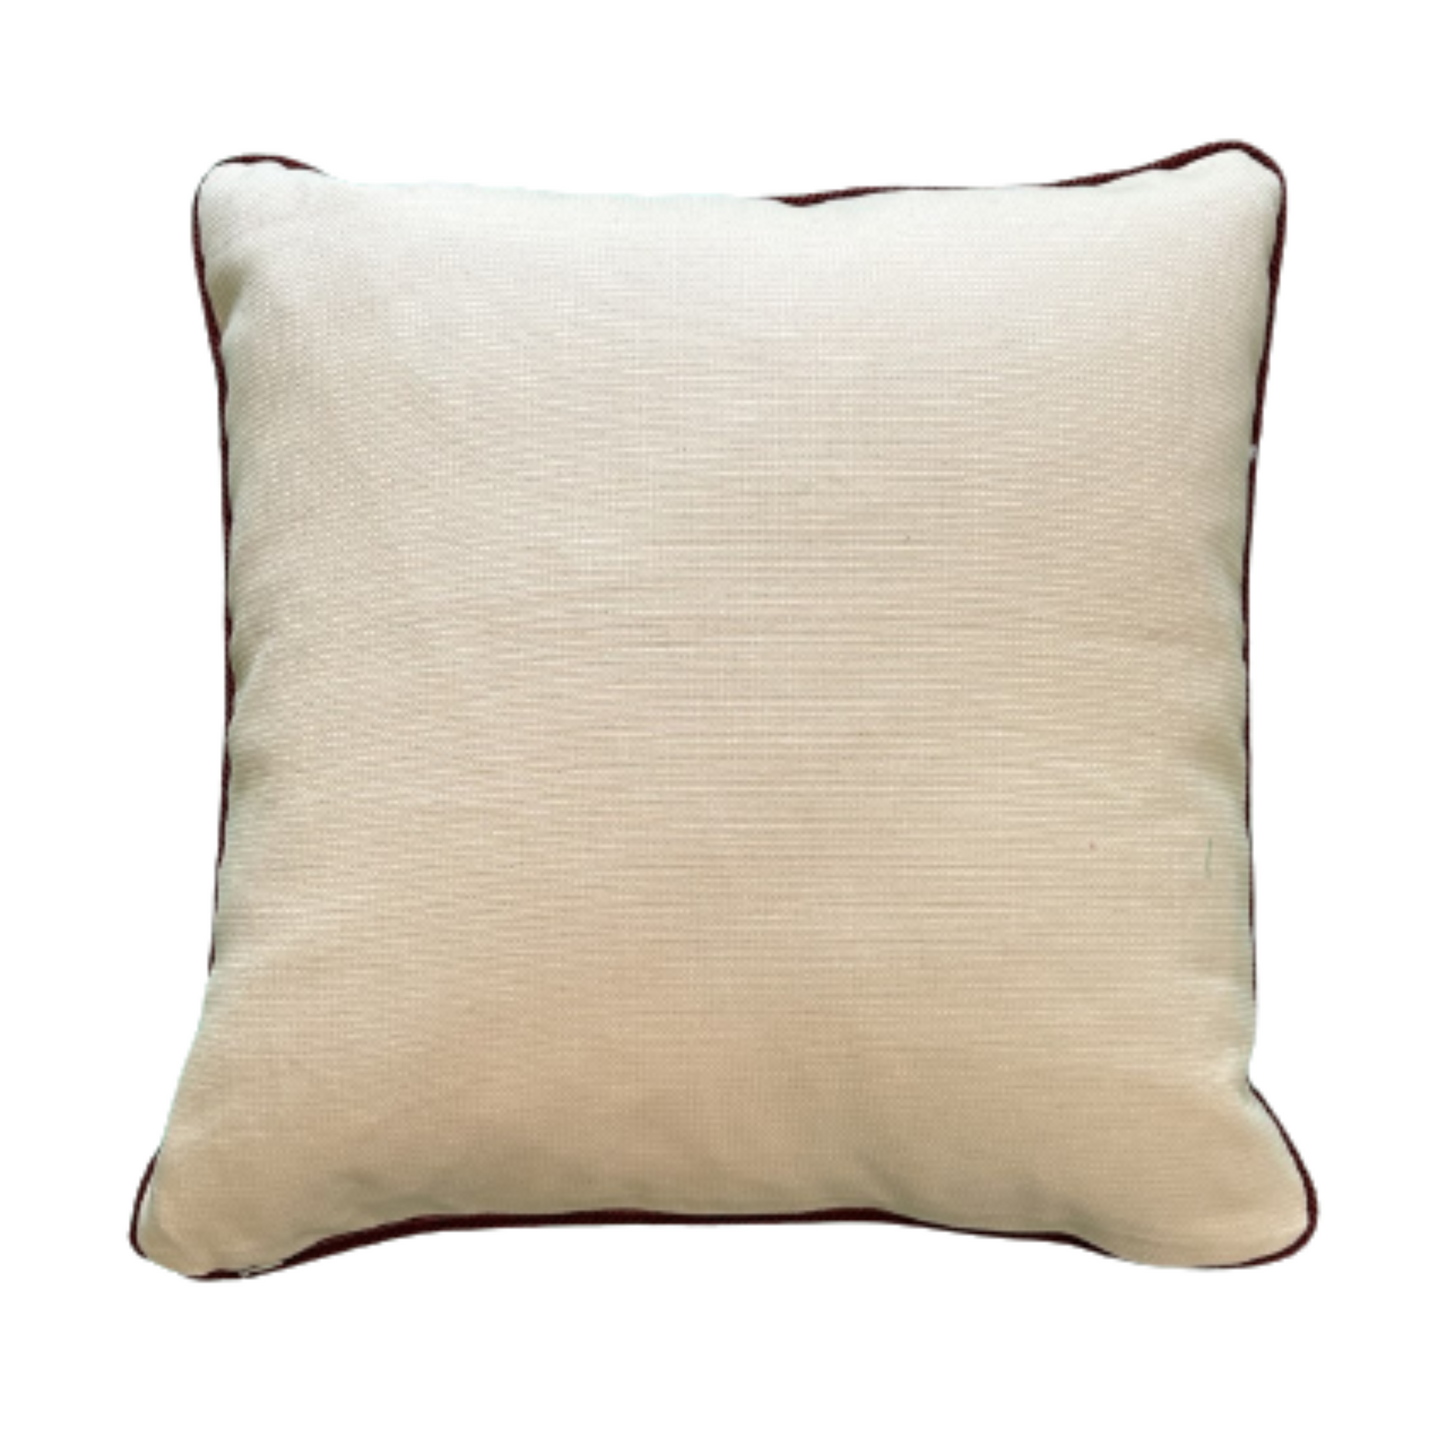 Priya Les Indiennes 20 x 20 Decorative Pillow with Down Feather Insert